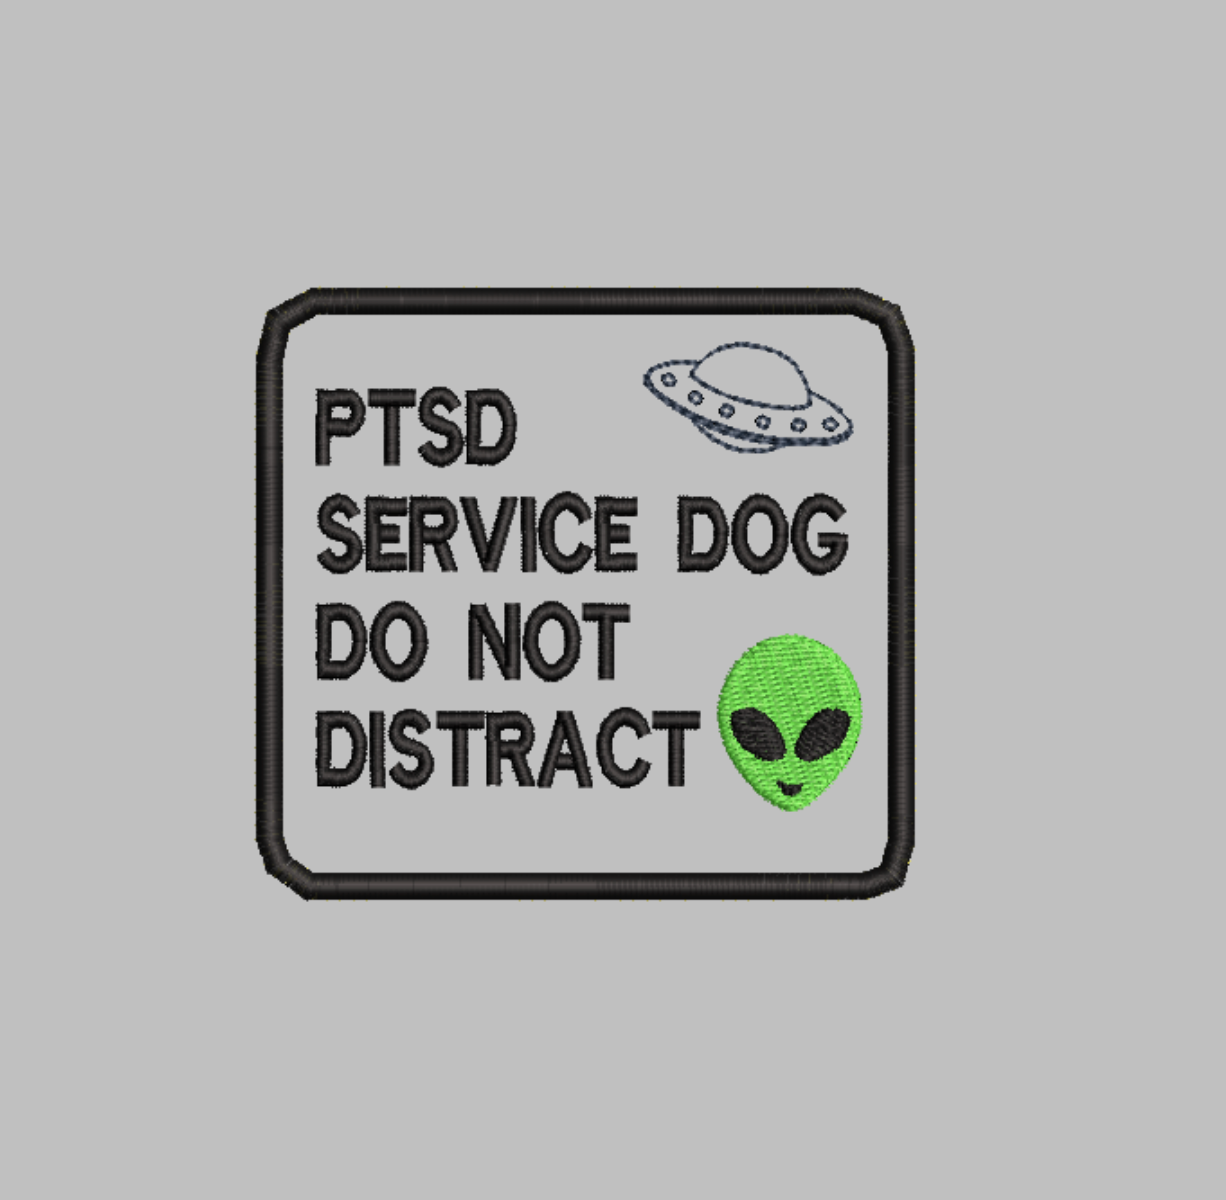 PTSD SERVICE DOG DO NOT DISTRACT ALIEN EMBROIDERY FILE